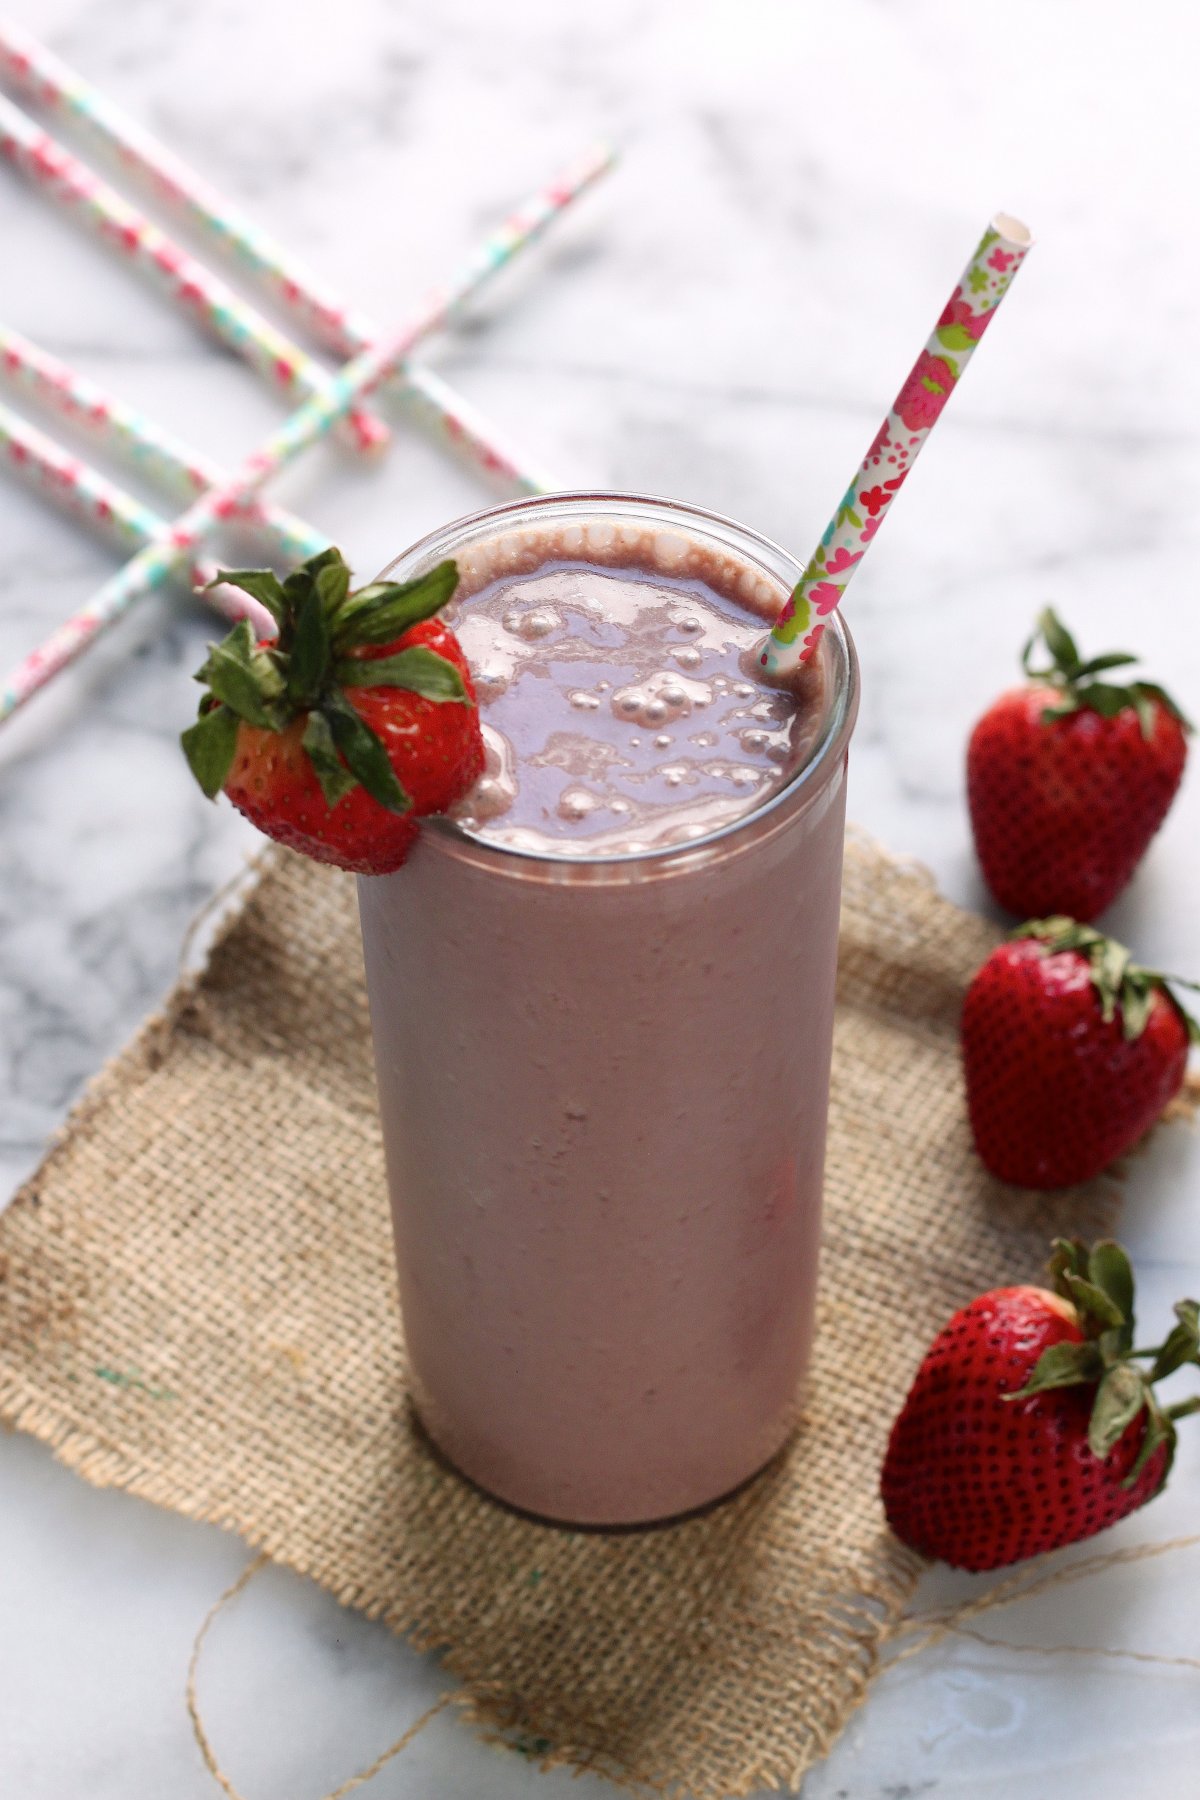 Strawberry Spinach Smoothies - Baker by Nature